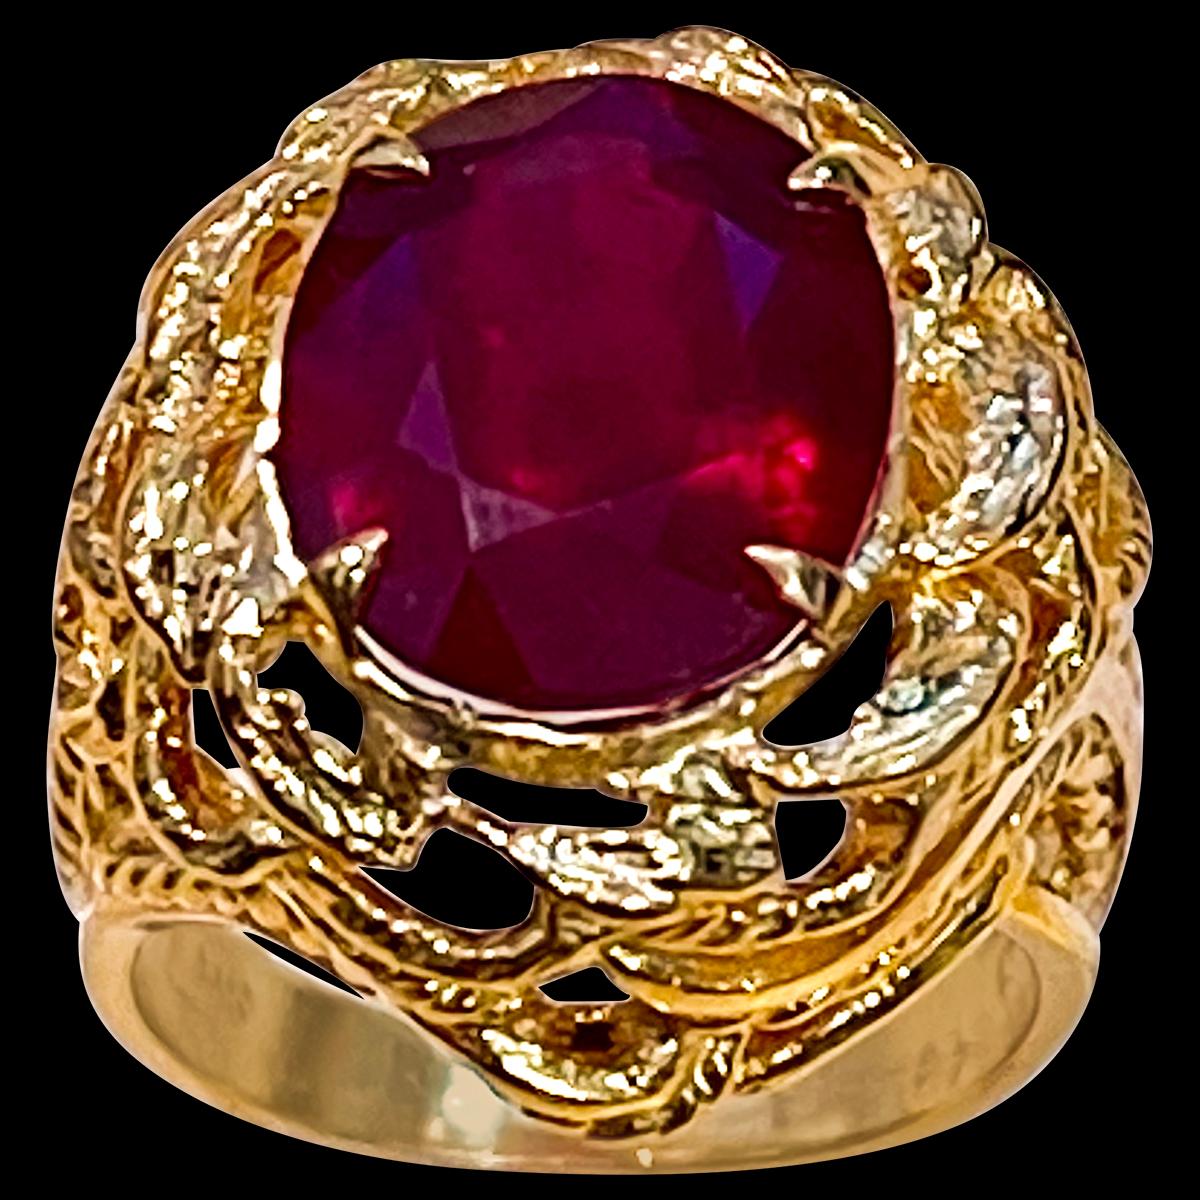 5 Carat Treated  Oval Ruby 14 Karat Yellow Gold Cocktail Ring Size 6
 prong set
14 K Yellow Gold: 9.6  gram
Stamped 14K
Ring Size 6 ( can be altered for no charge )
Large approximately 5  carat oval shape ruby Treated 
Very solid make of the ring